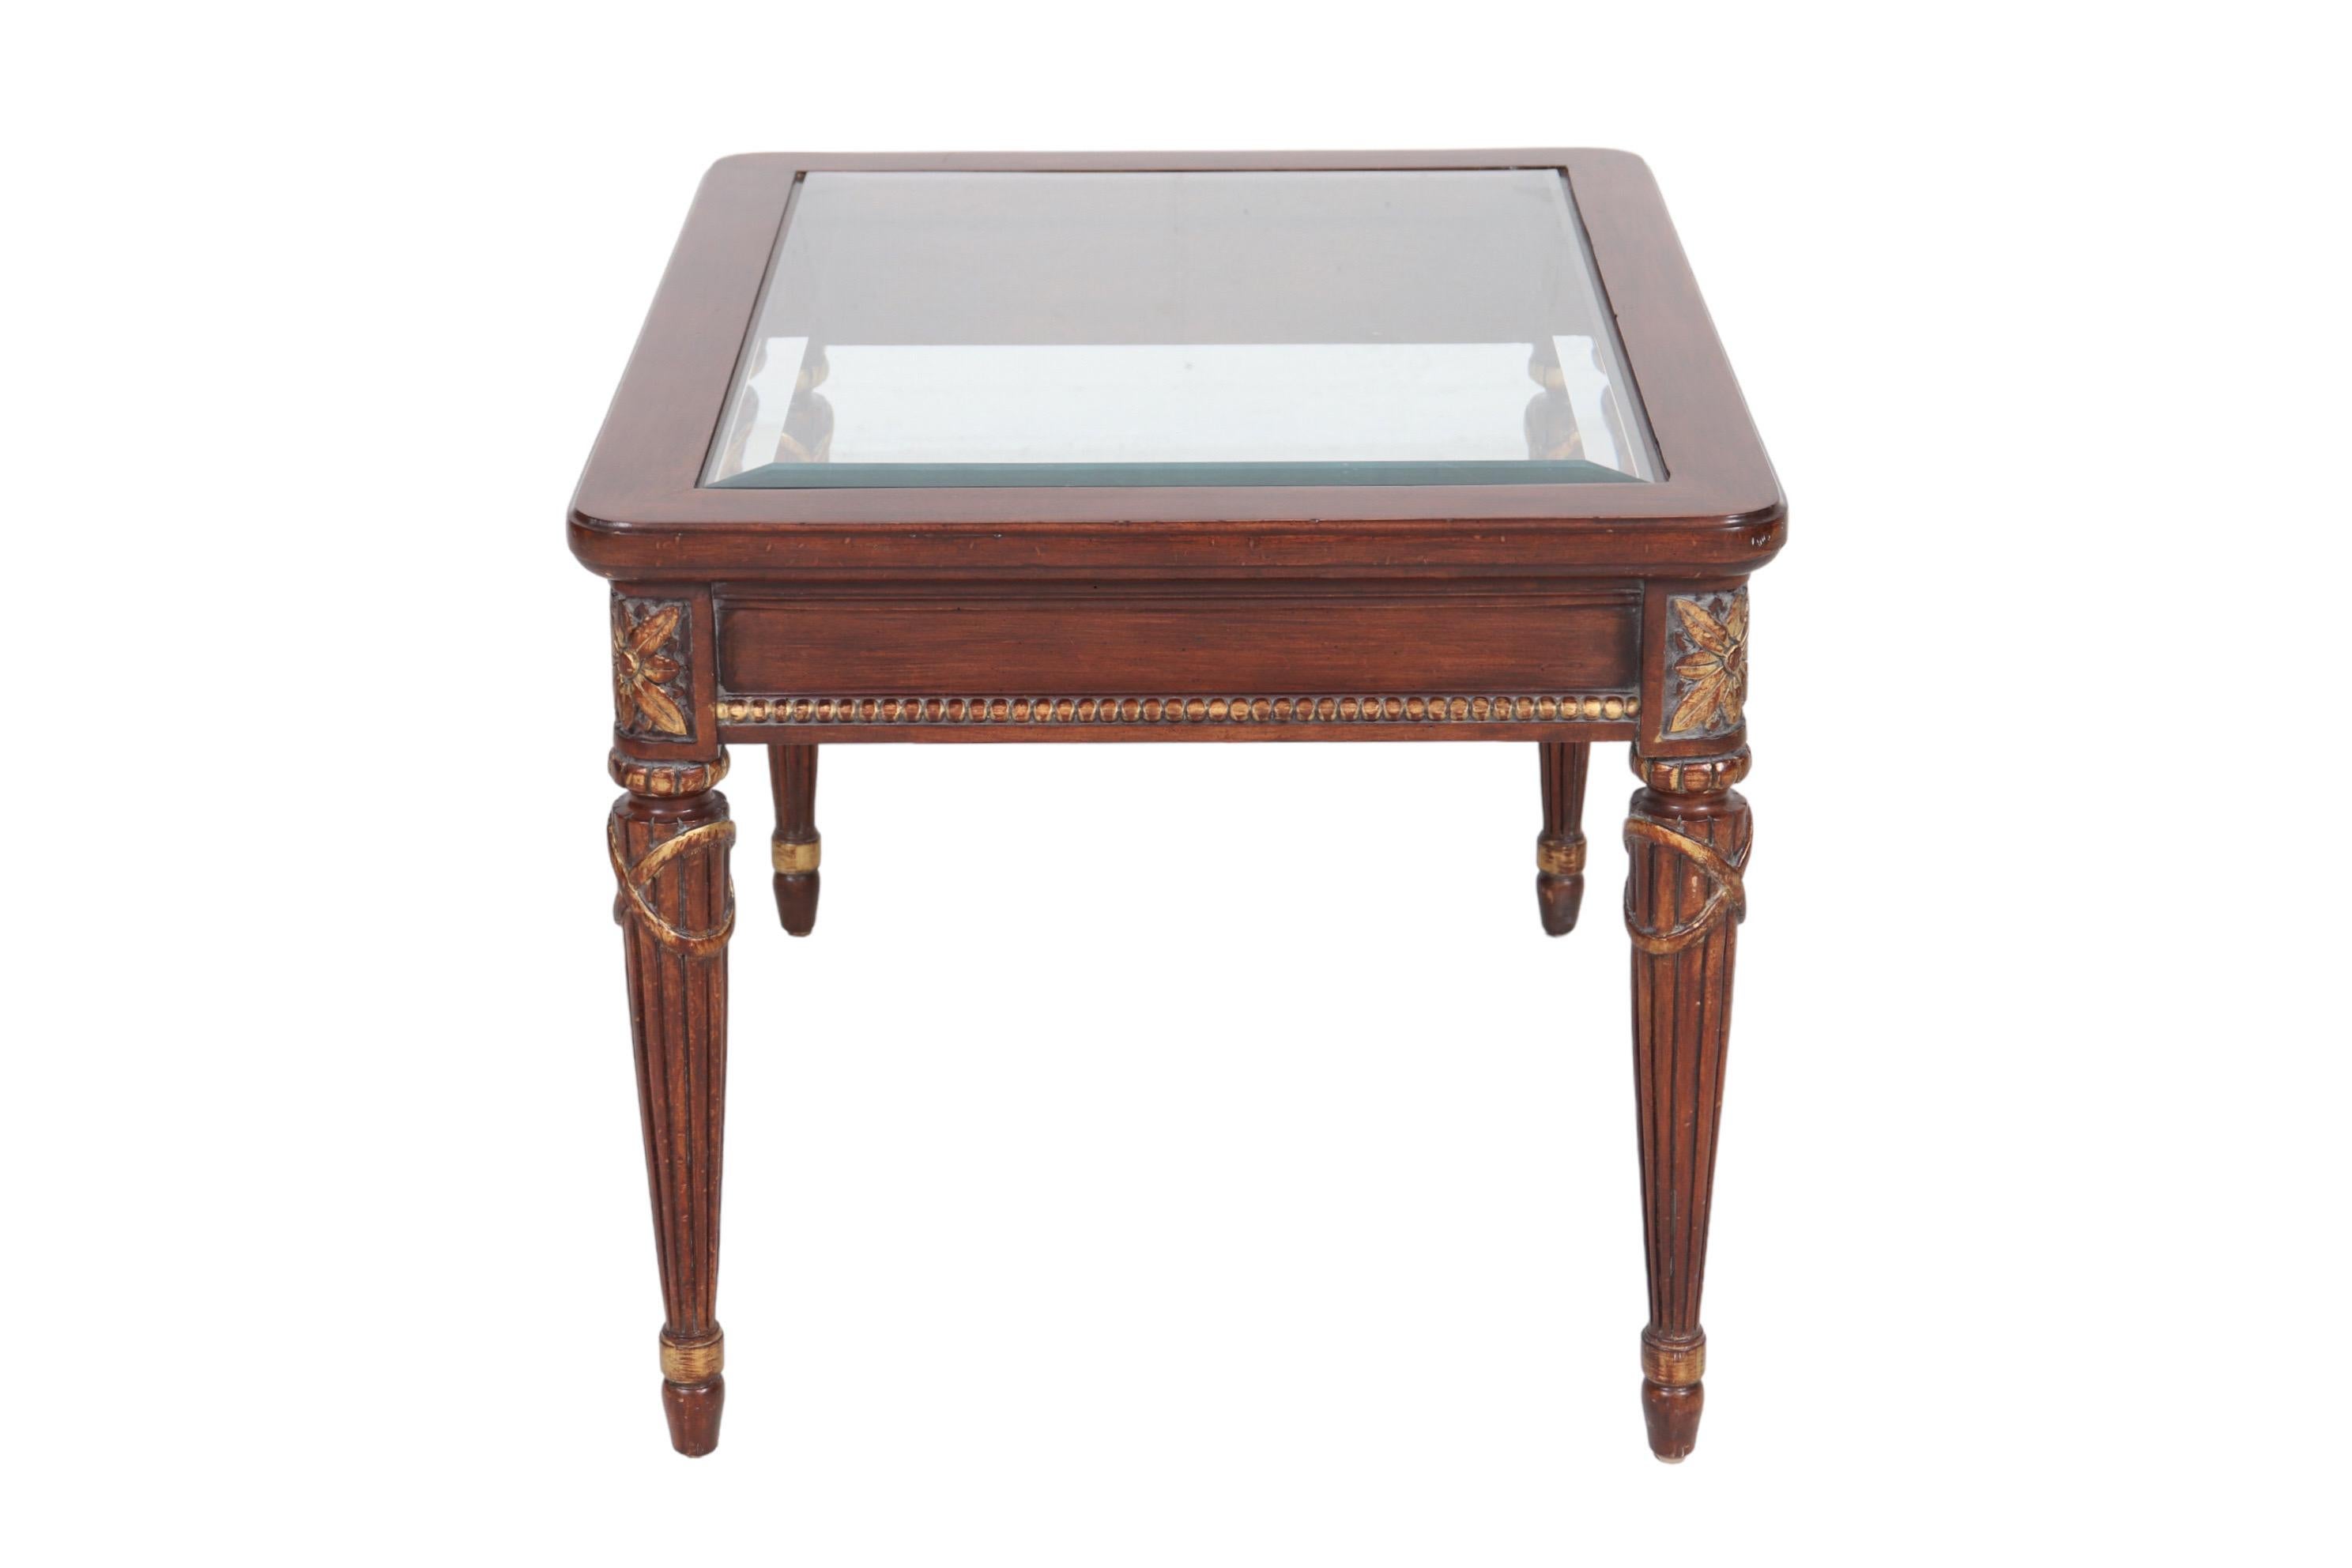 A Louis XVI style side table with an inset beveled glass top. The table skirt is decorated with a carved beaded trim. Carved rosettes top round reeded legs that taper and finish with blunt arrow feet.